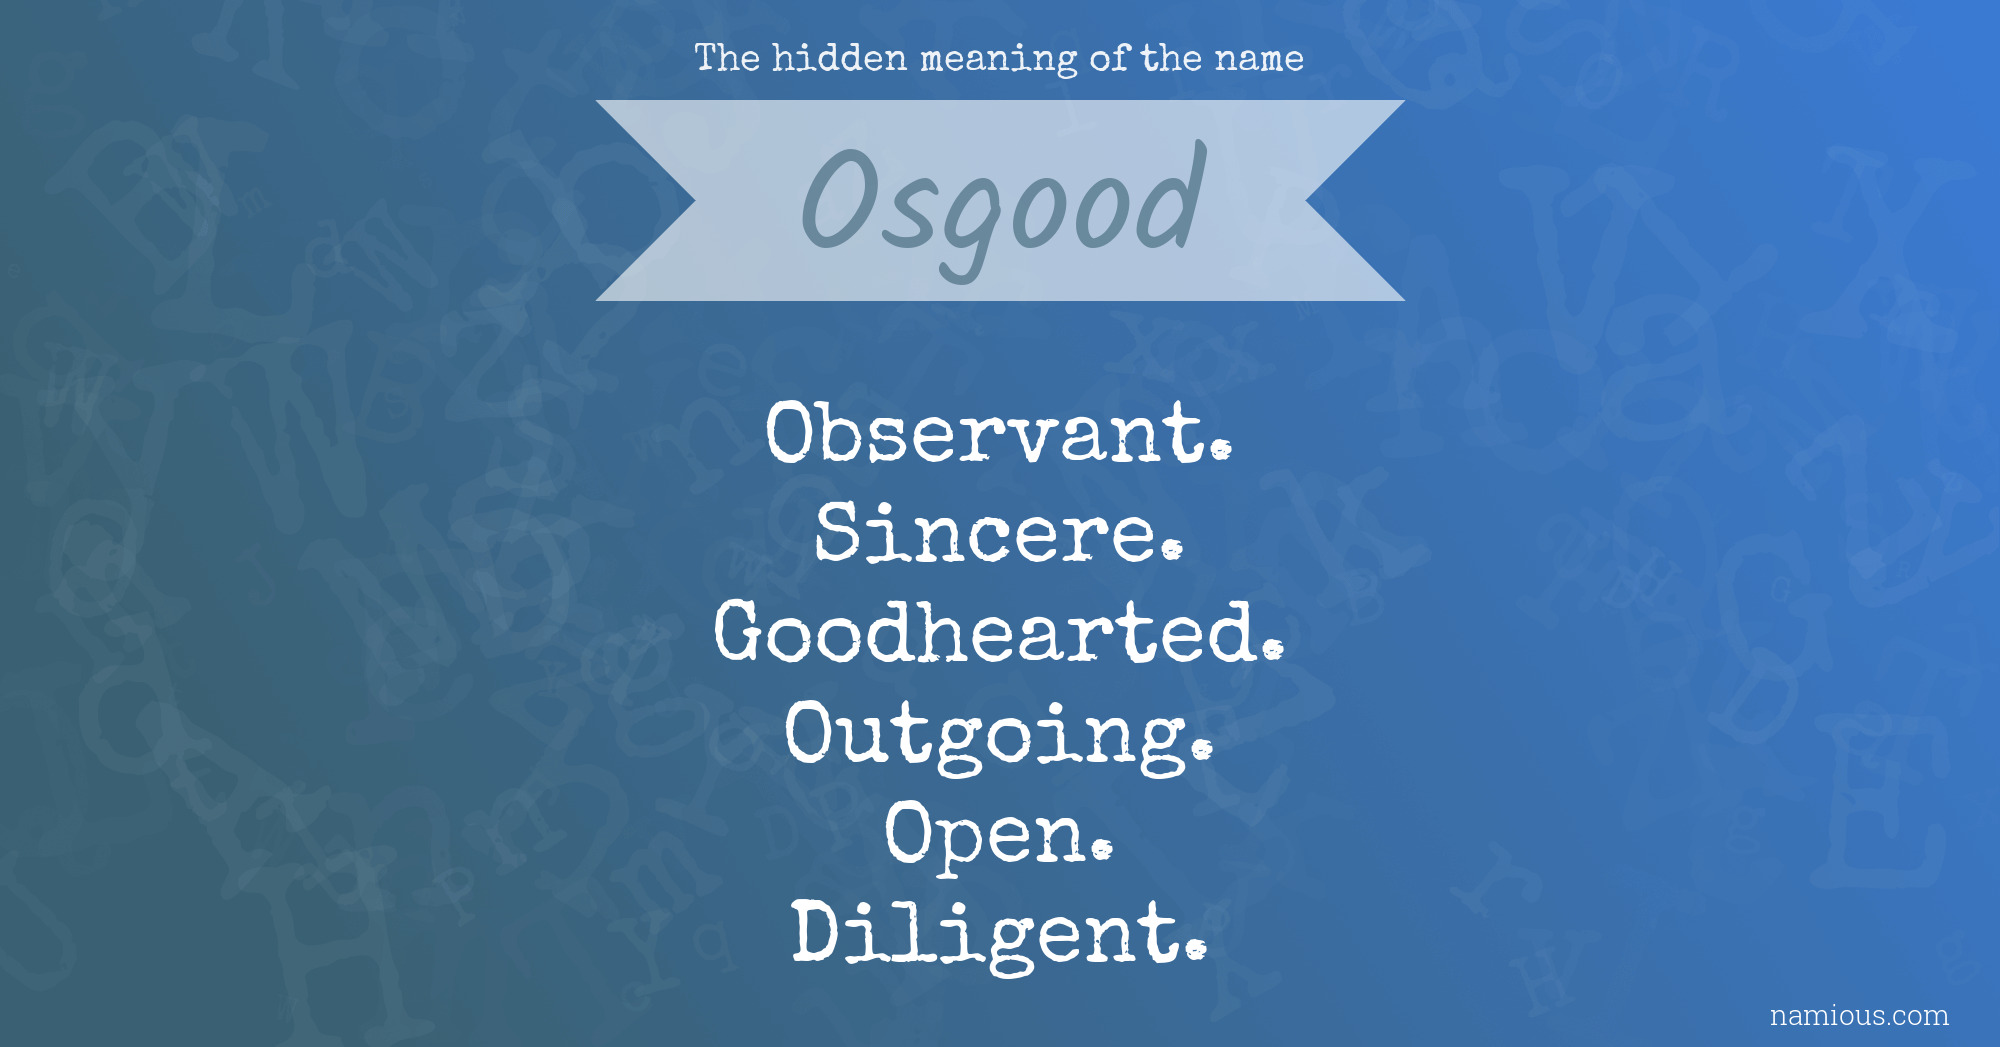 The hidden meaning of the name Osgood